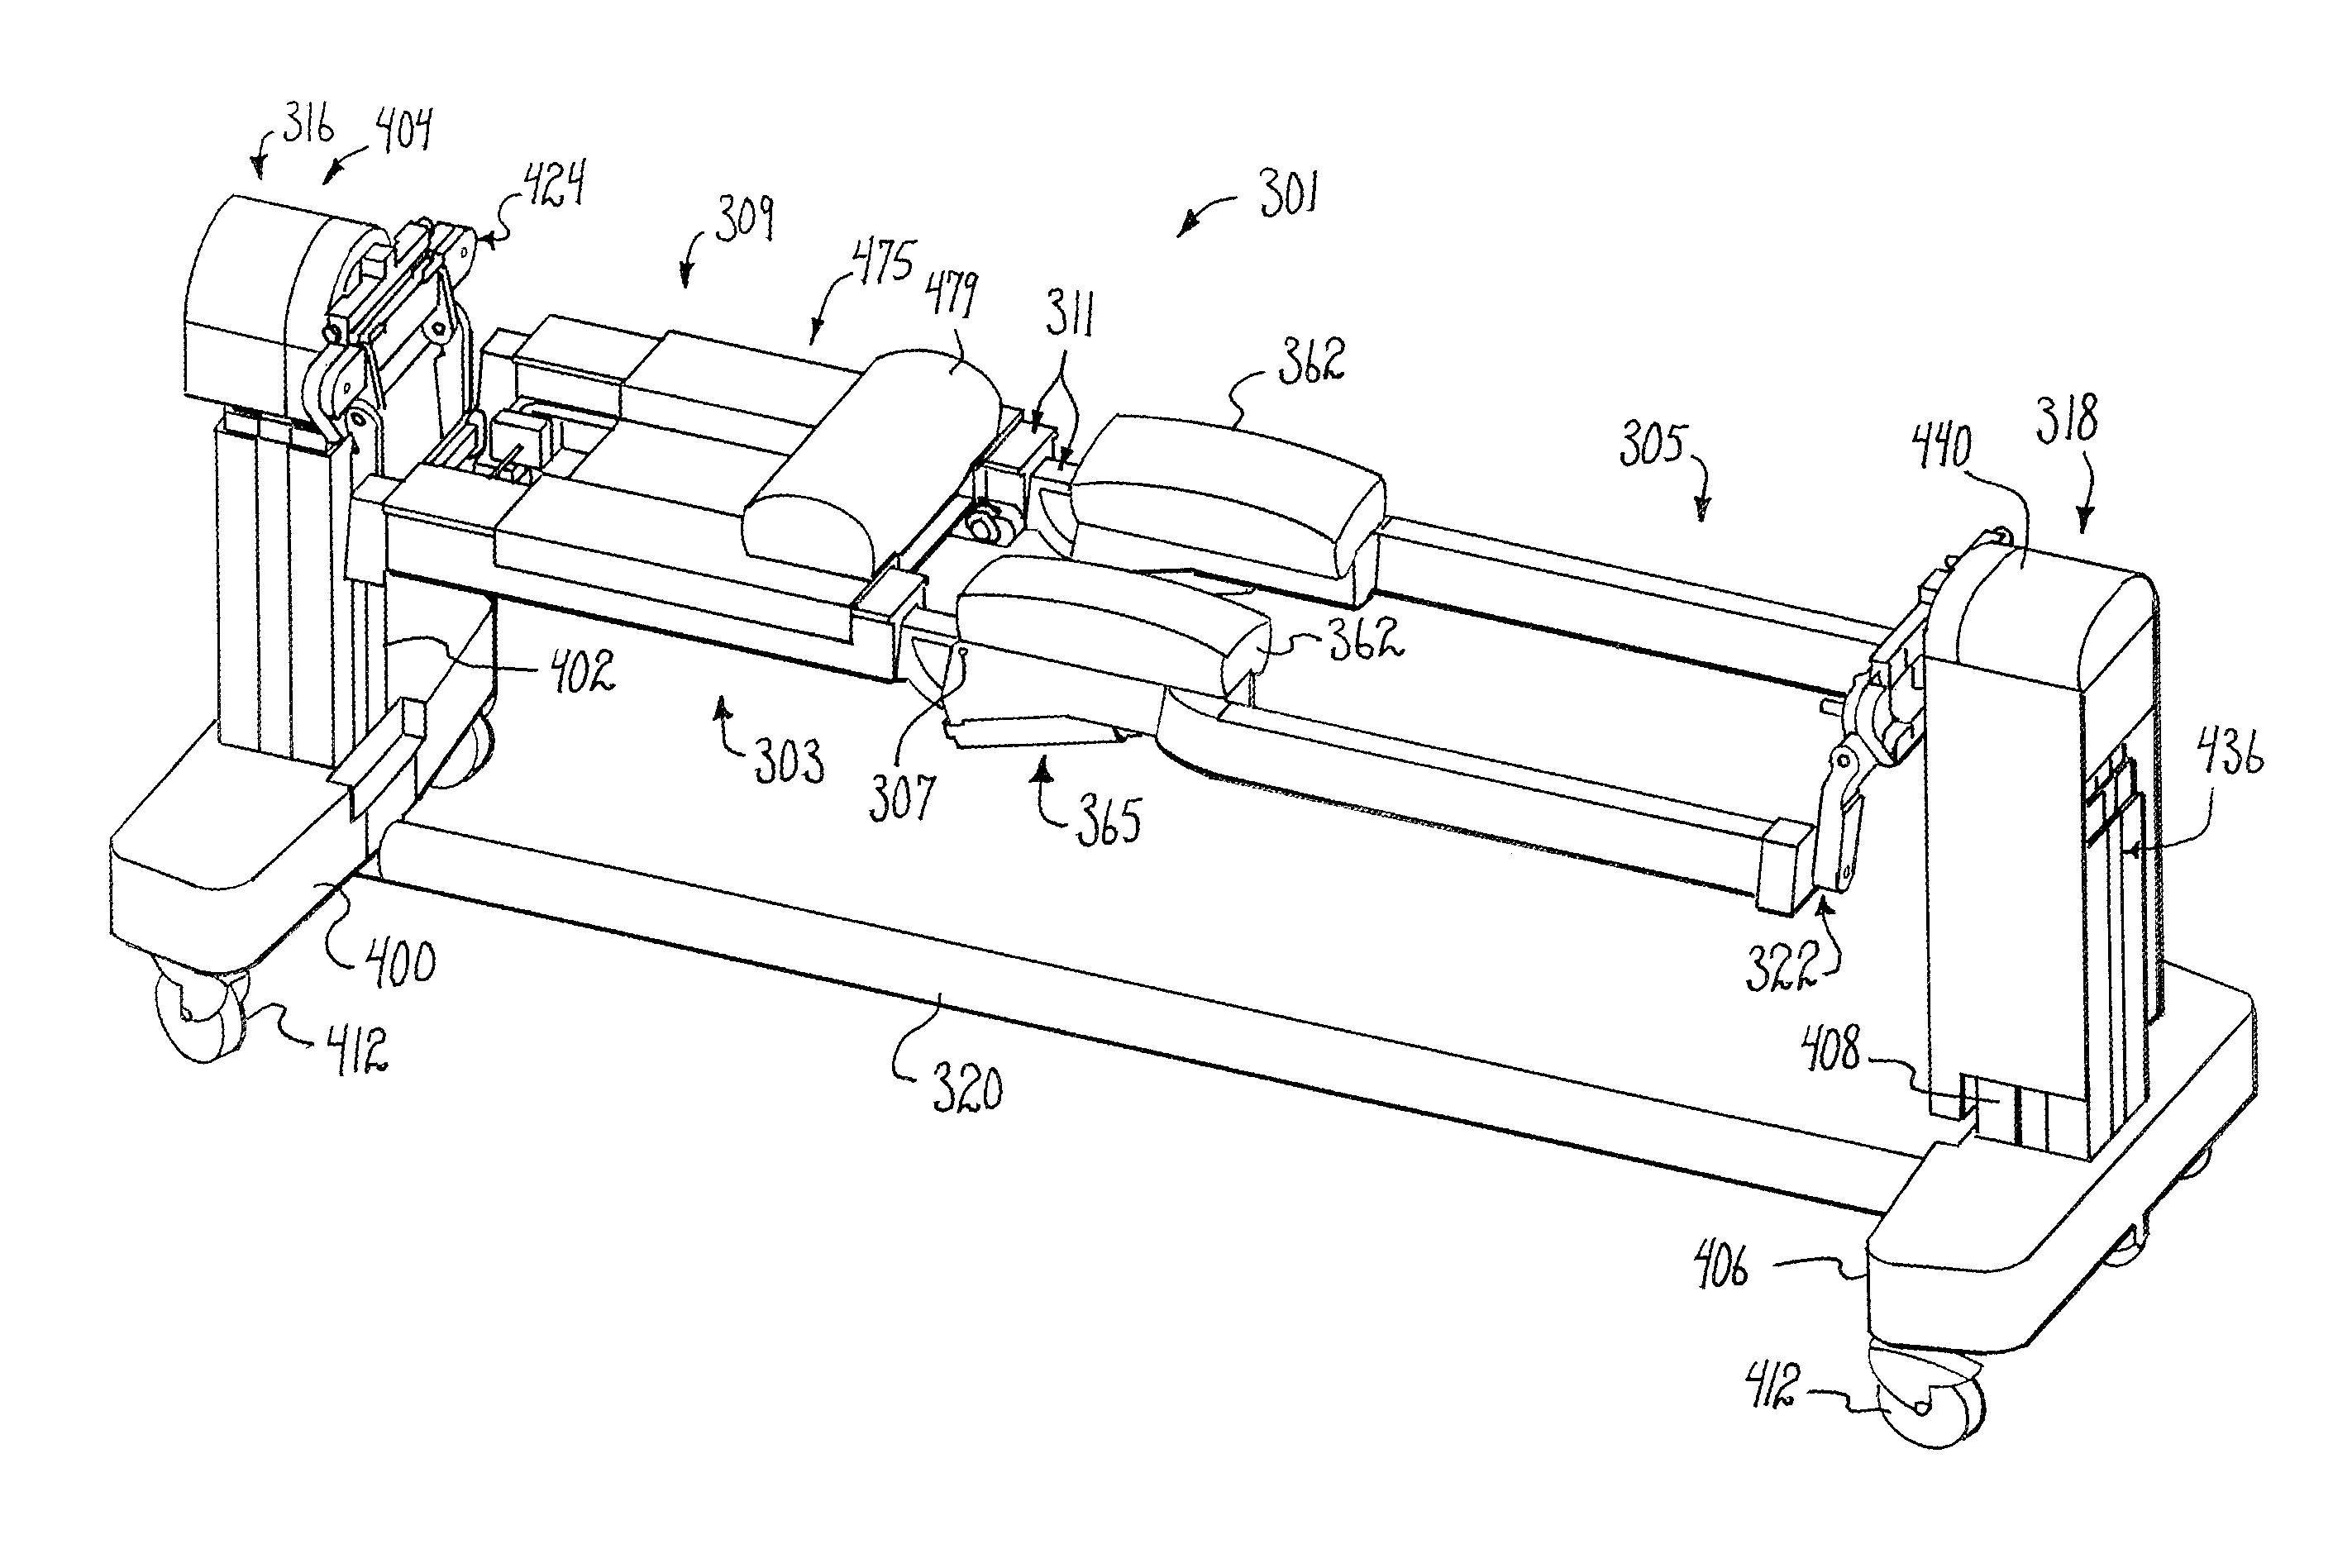 Patient support apparatus with body slide position digitally coordinated with hinge angle